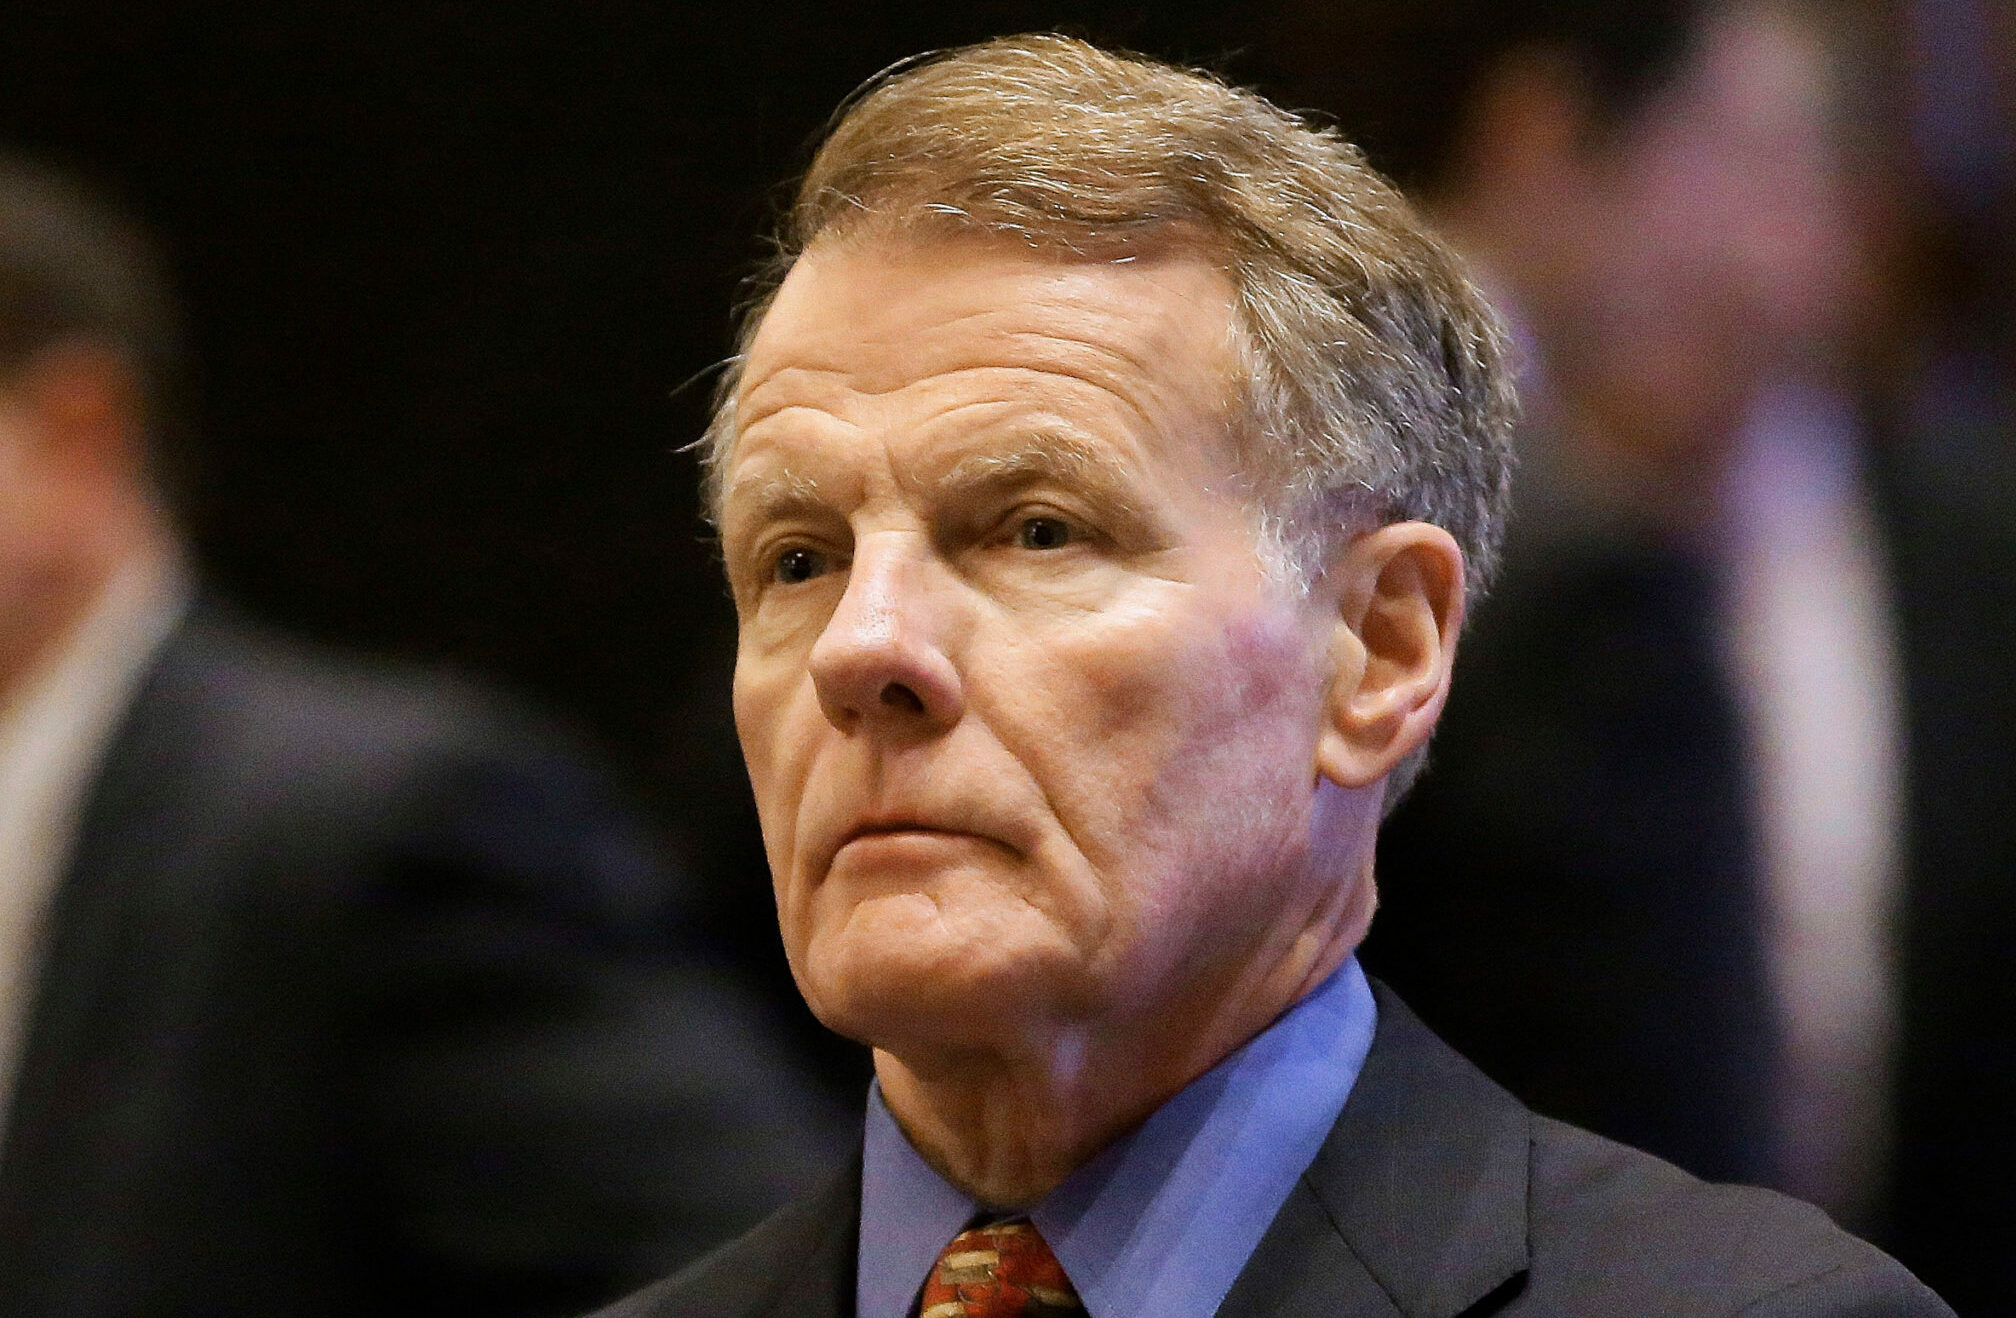 Mandatory Credit: Photo by Seth Perlman/AP/Shutterstock (6232081a)
Michael Madigan Illinois Speaker of the House Michael Madigan, D-Chicago, waits to address lawmakers at the Illinois State Capitol in Springfield. On, Madigan criticized unions for their stance on the state's pension situation and says their proposal for a summit on the matter is "not timely
Illinois Pensions Speaker, Springfield, USA